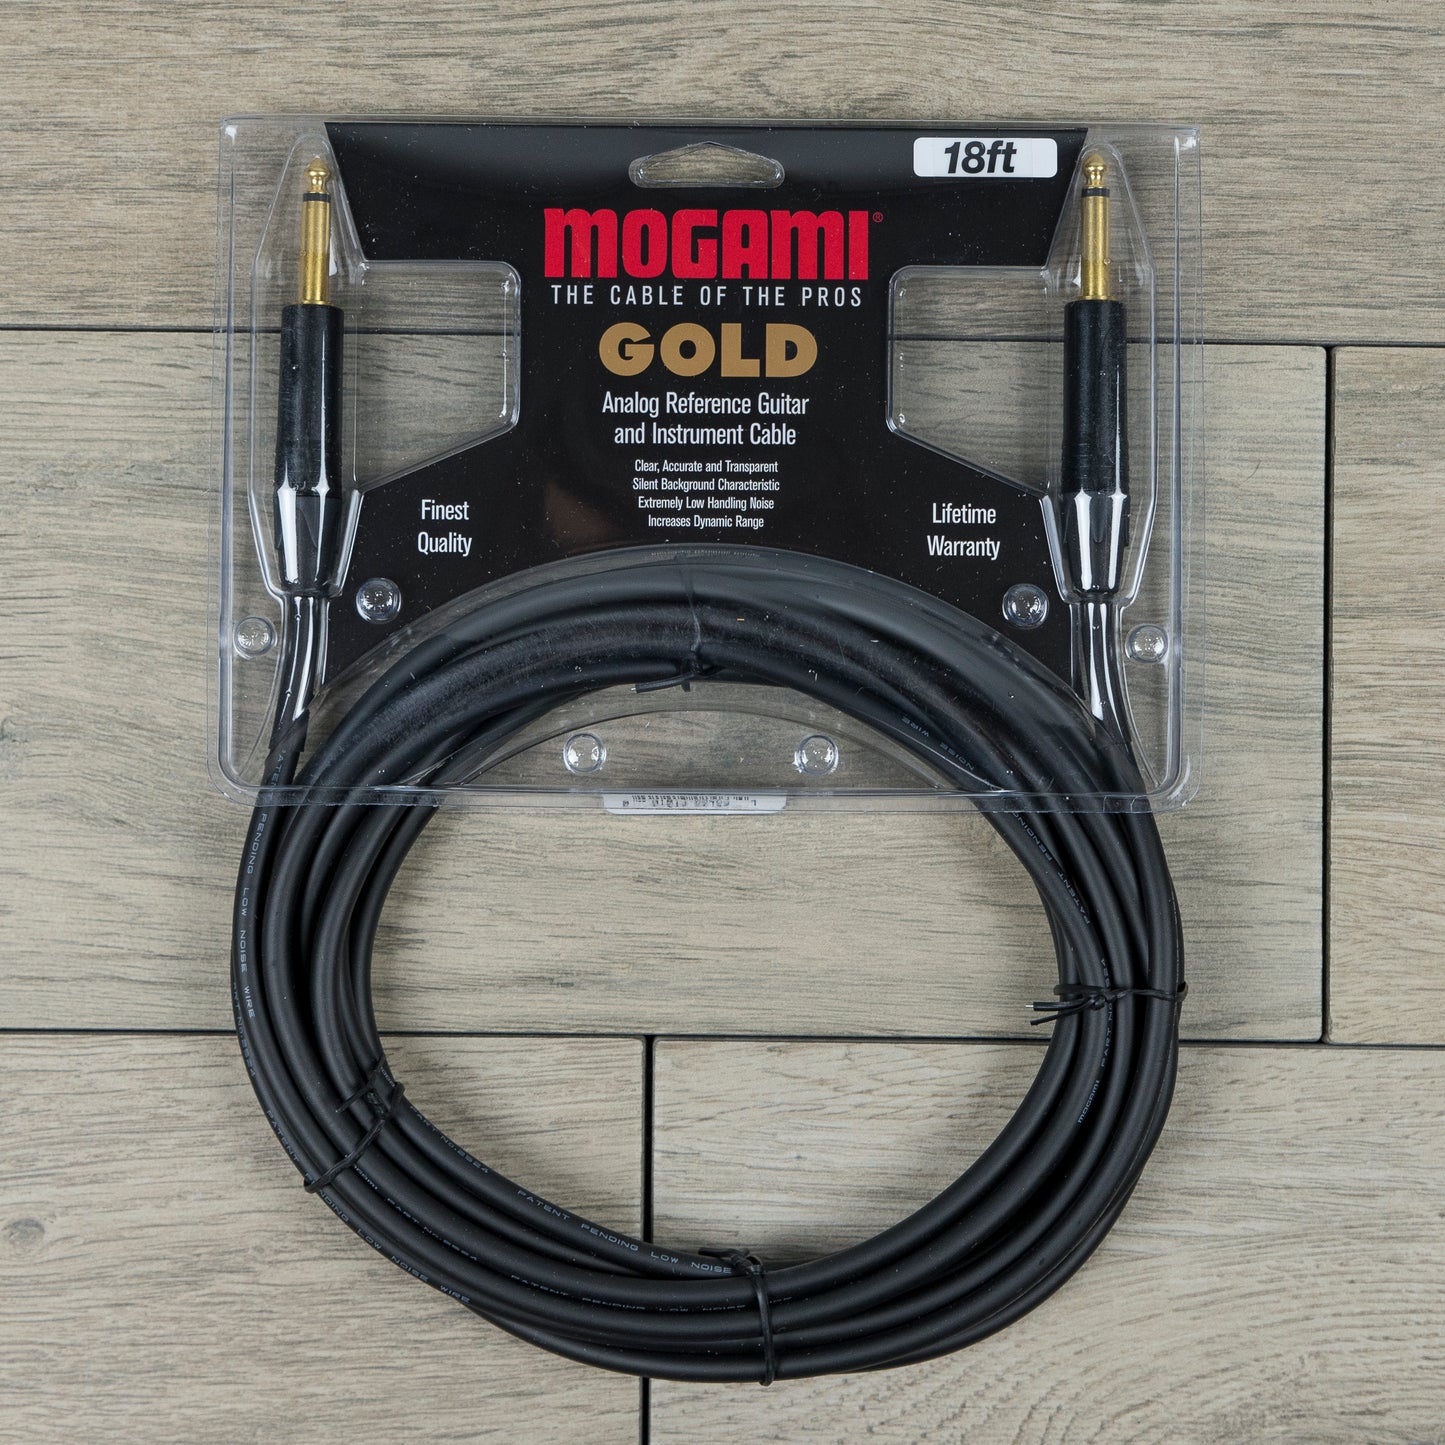 Mogami Gold Instrument Cable (18 ft)